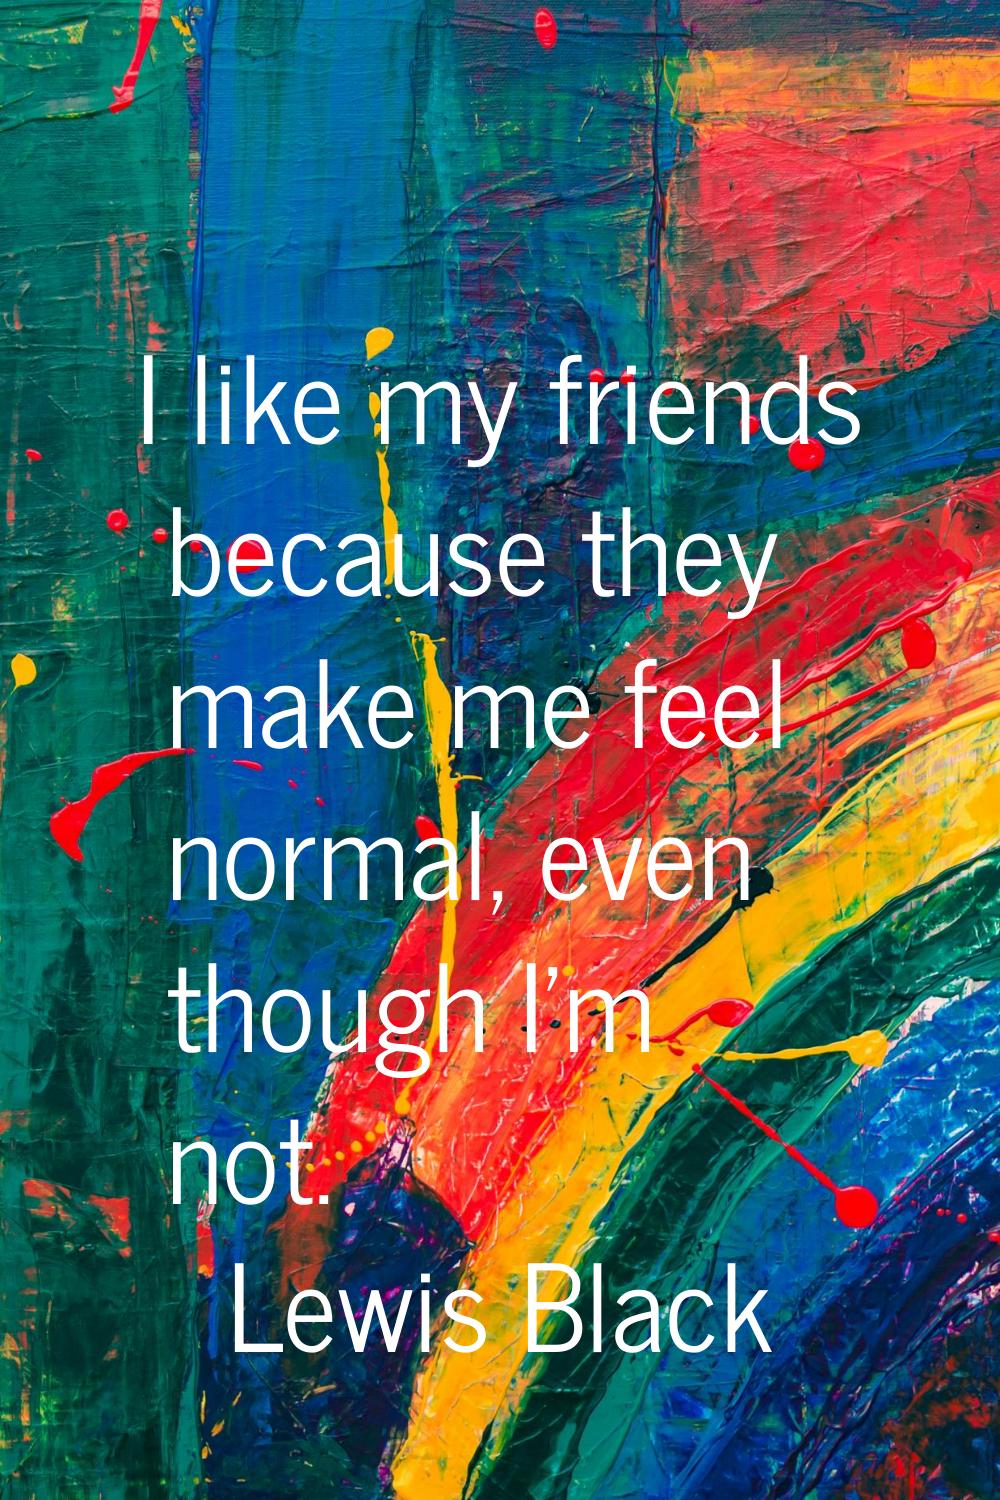 I like my friends because they make me feel normal, even though I'm not.